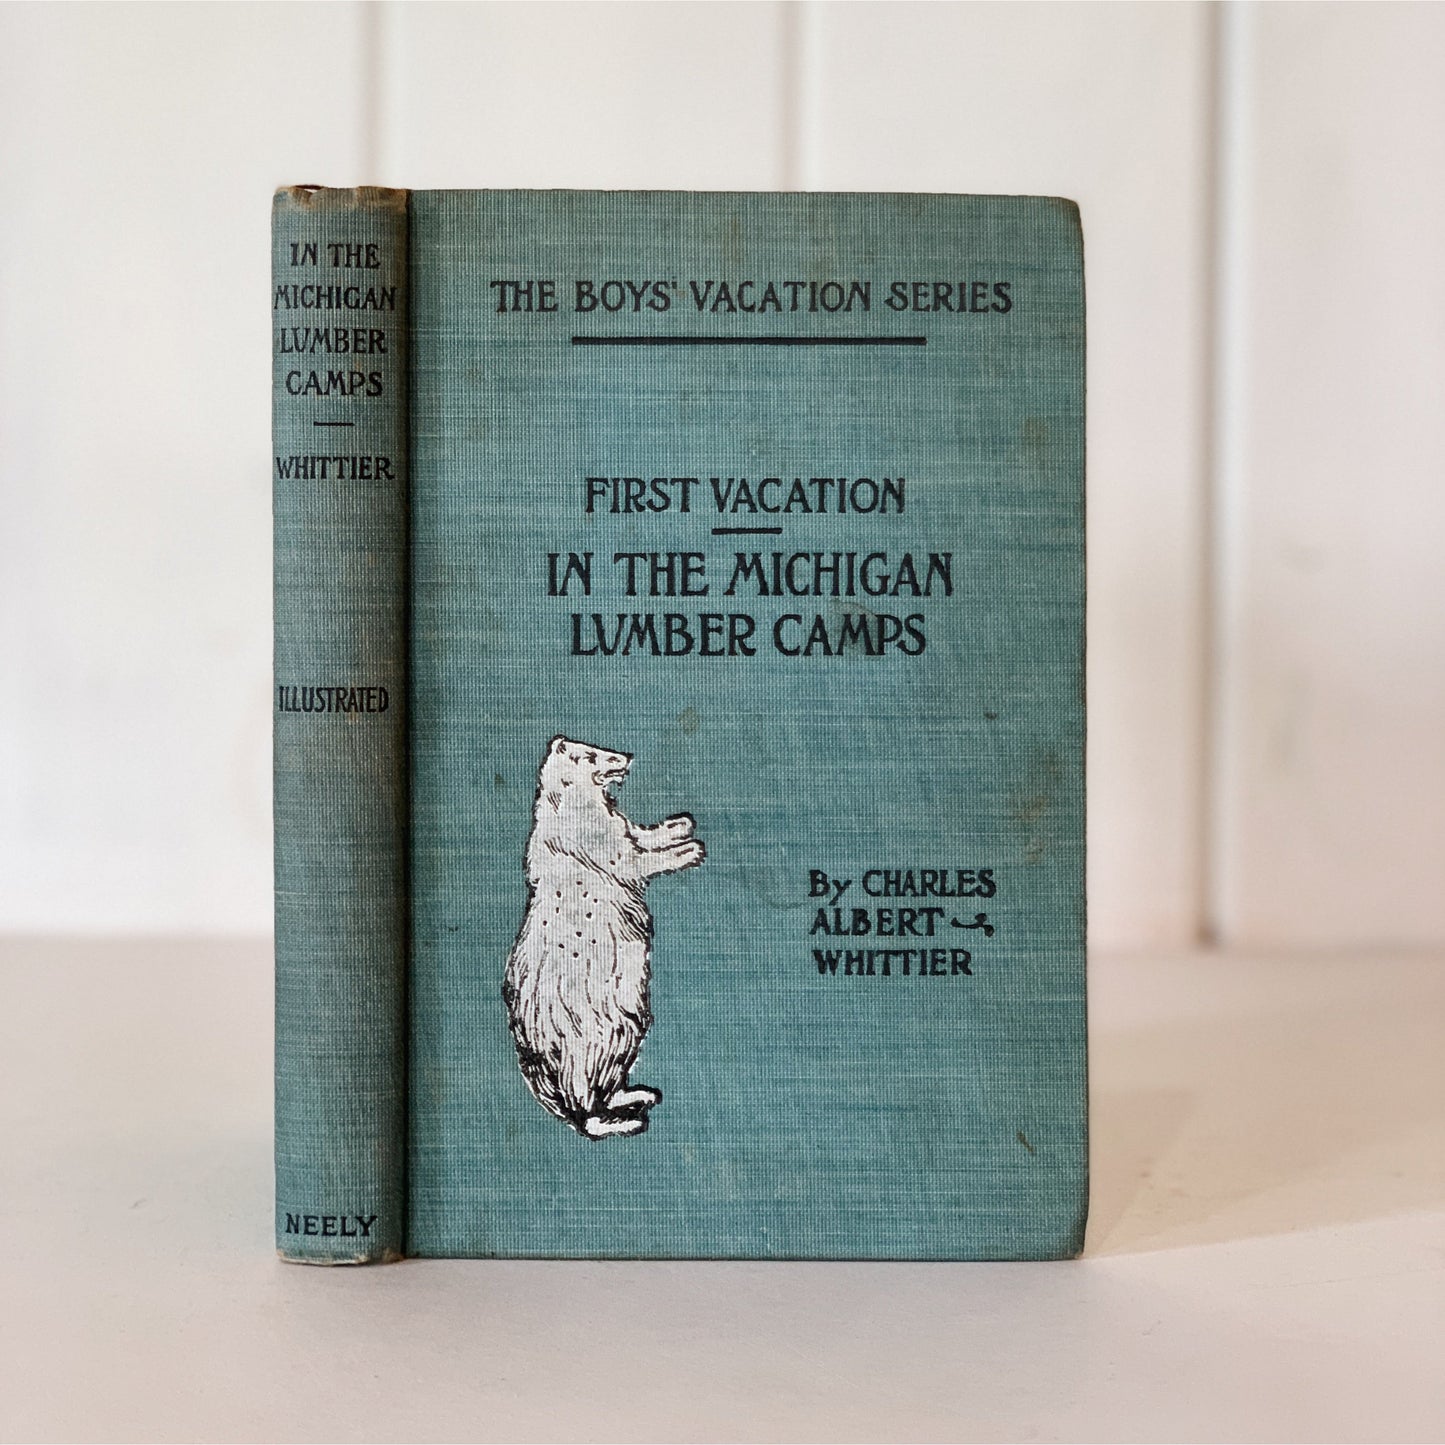 First Vacation in the Michigan Lumber Camps, Charles Albert Whittier, 1900, Children's Fiction